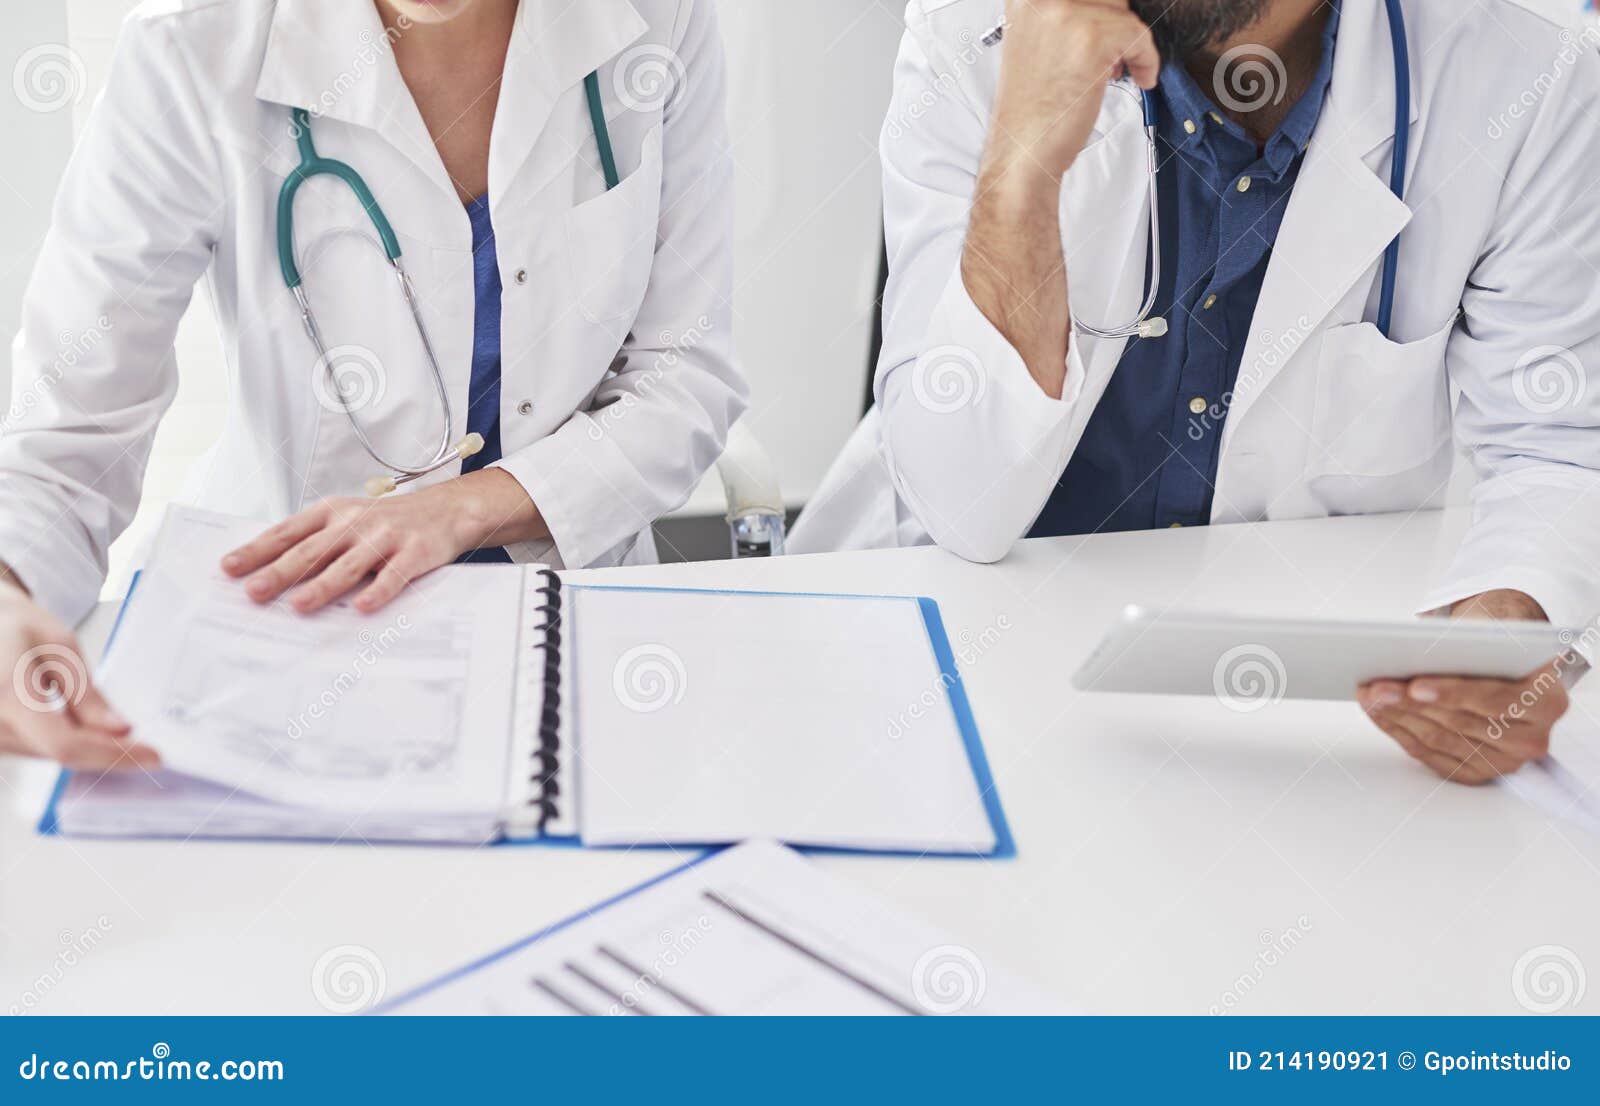 two busy doctors checking medical results